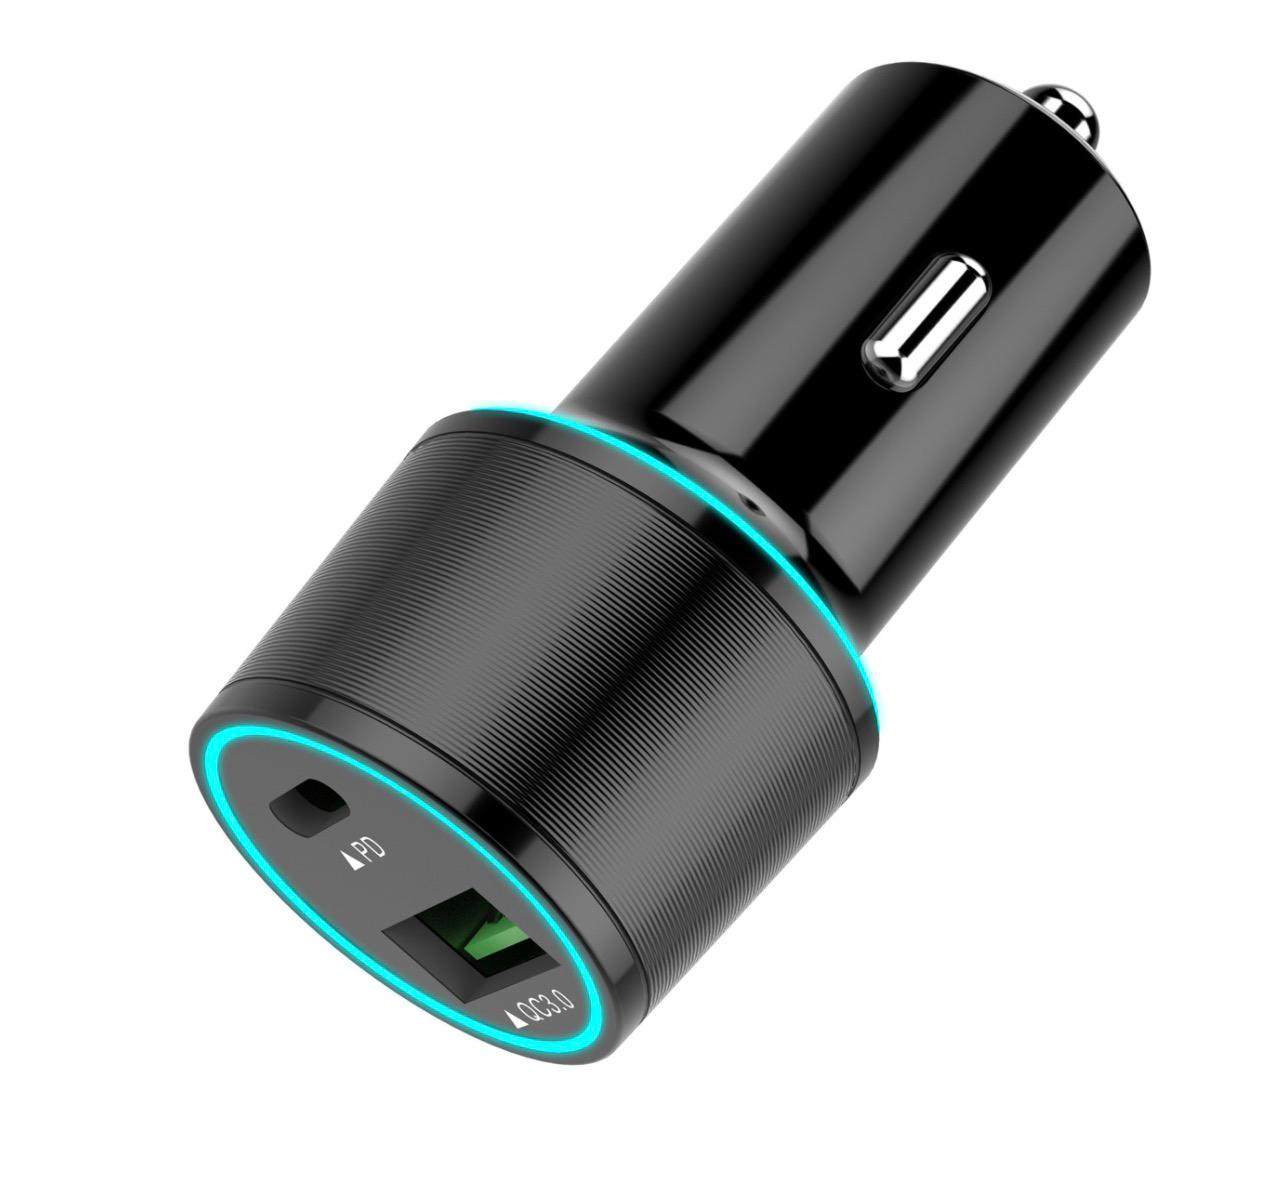 USB C Car Charger UrbanX 20W Car and Truck Charger For Samsung Galaxy A8s with Power Delivery 3.0 Cigarette Lighter USB Charger - Black, Comes with USB C to USB C PD Cable 3.3FT 1M - image 2 of 3